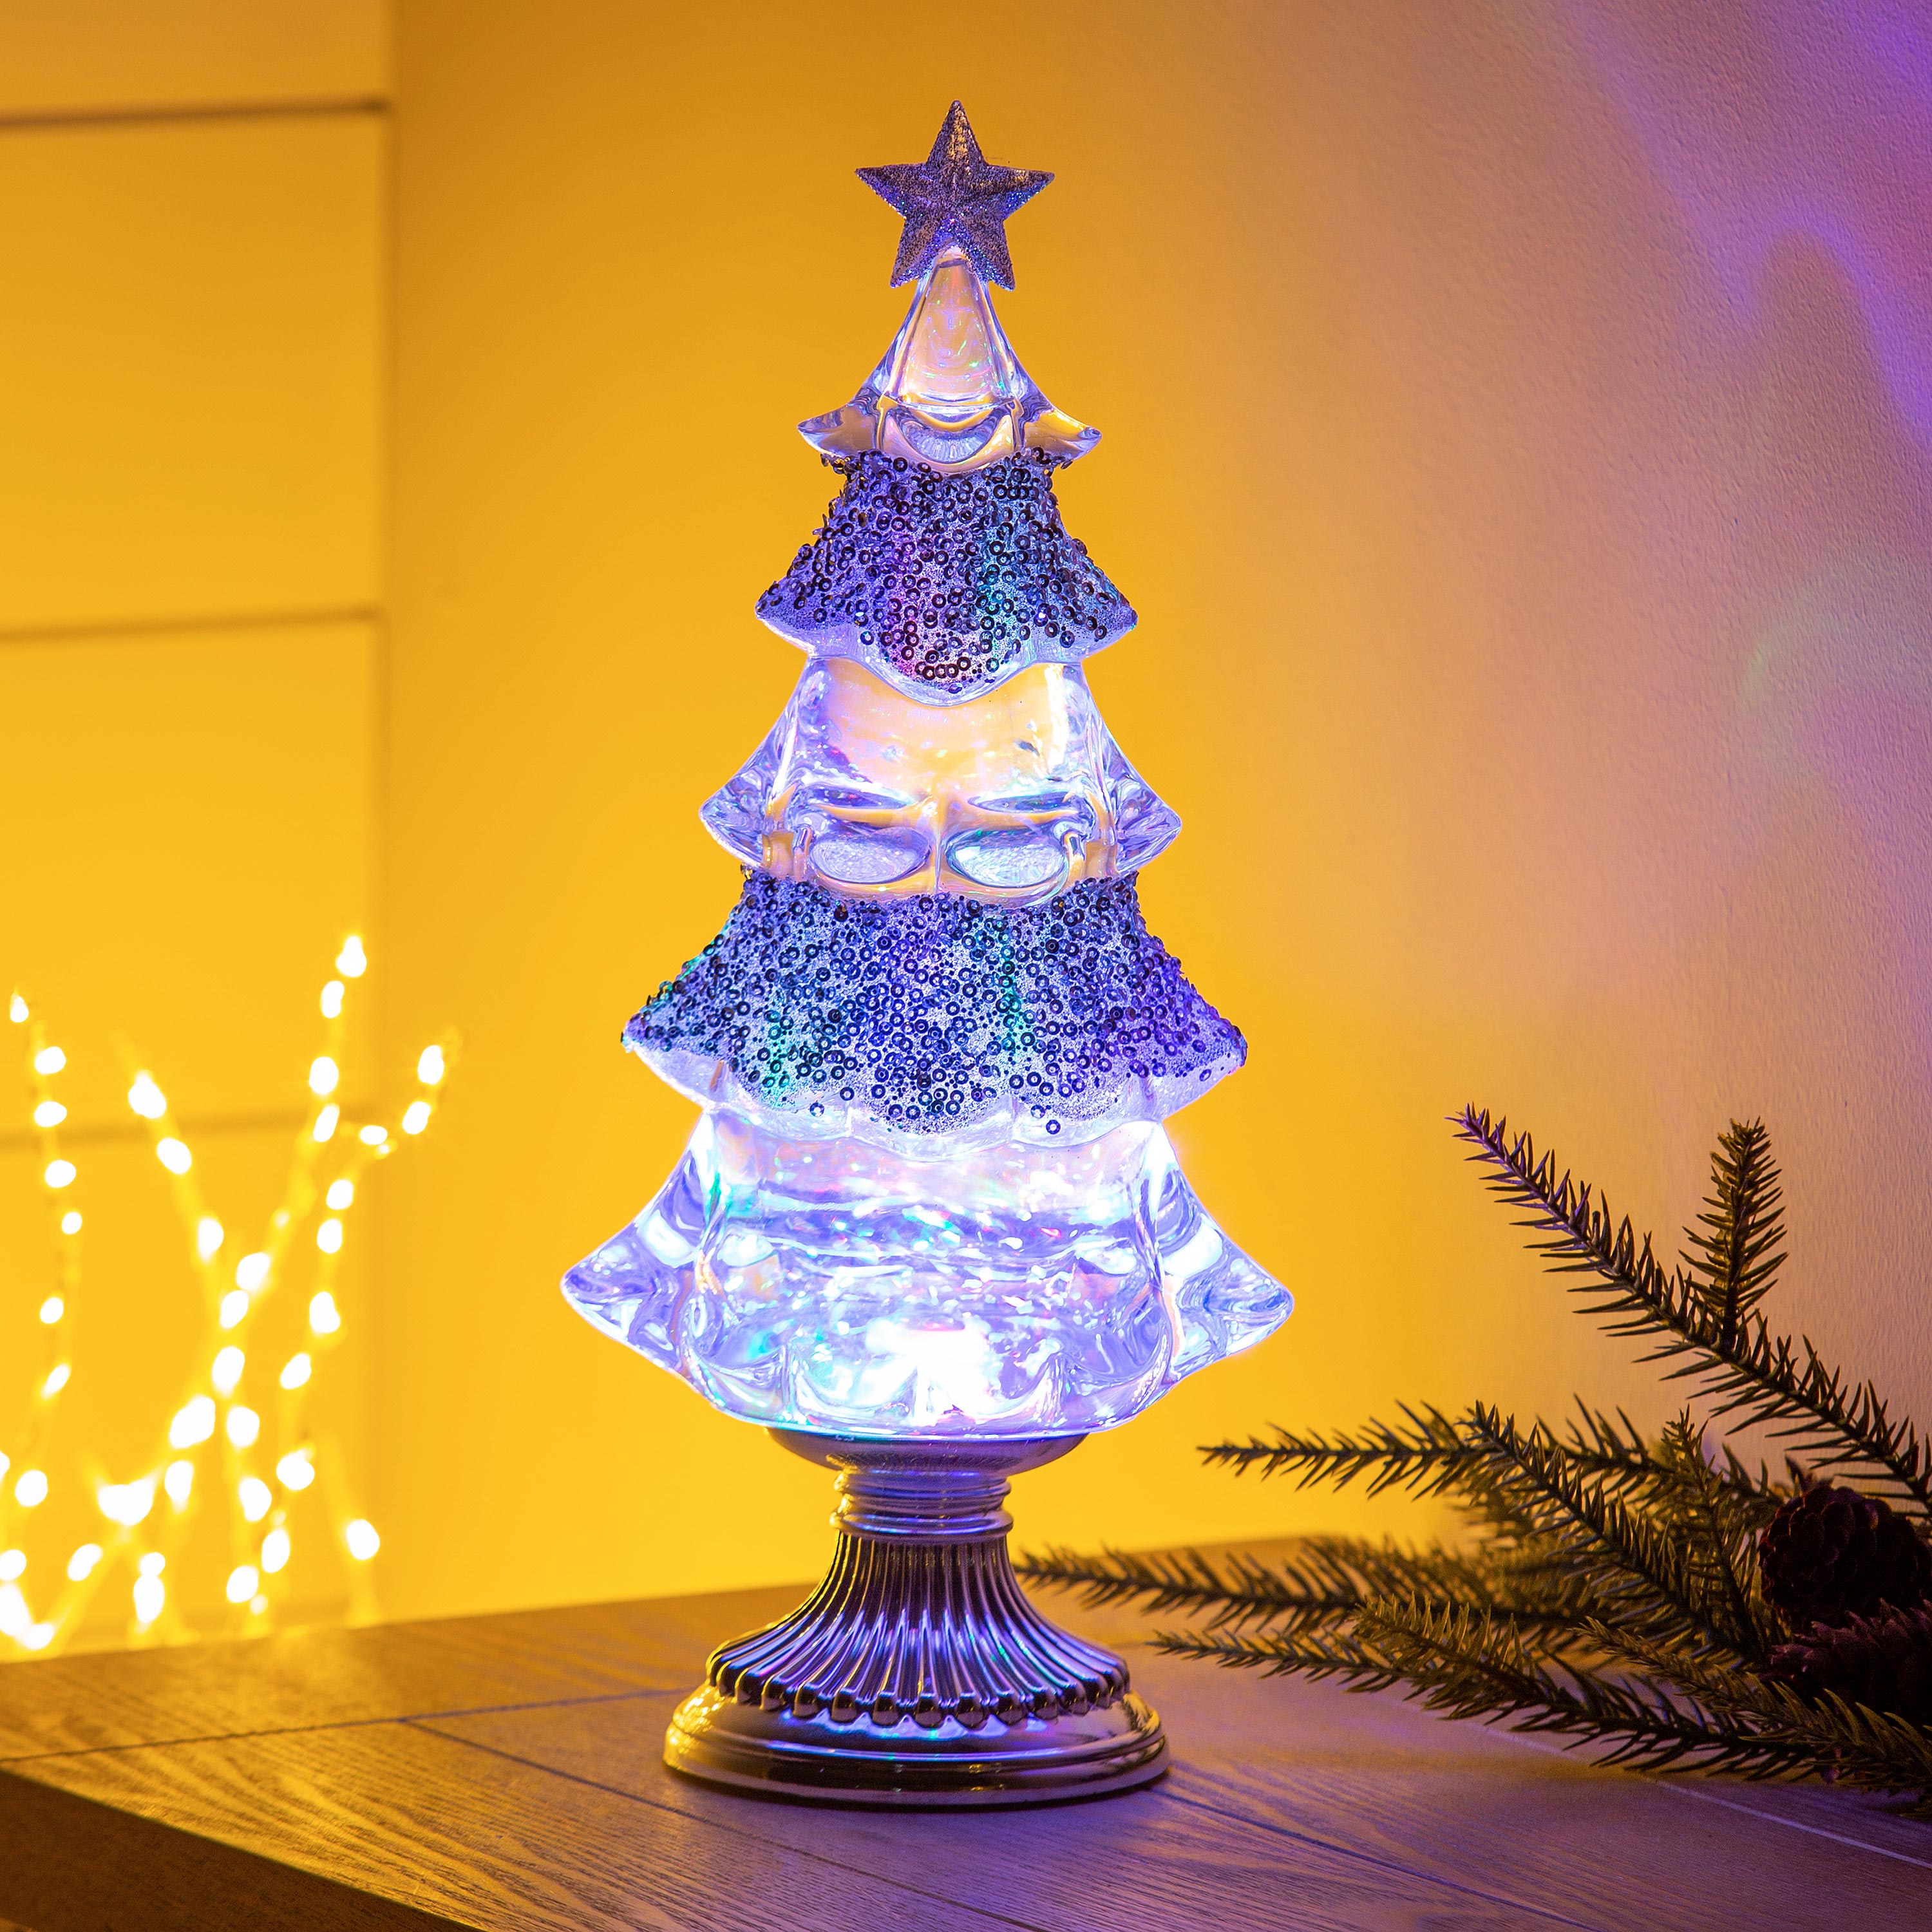 Lighted Water Globe Christmas Tree Table Décor | Plow & Hearth